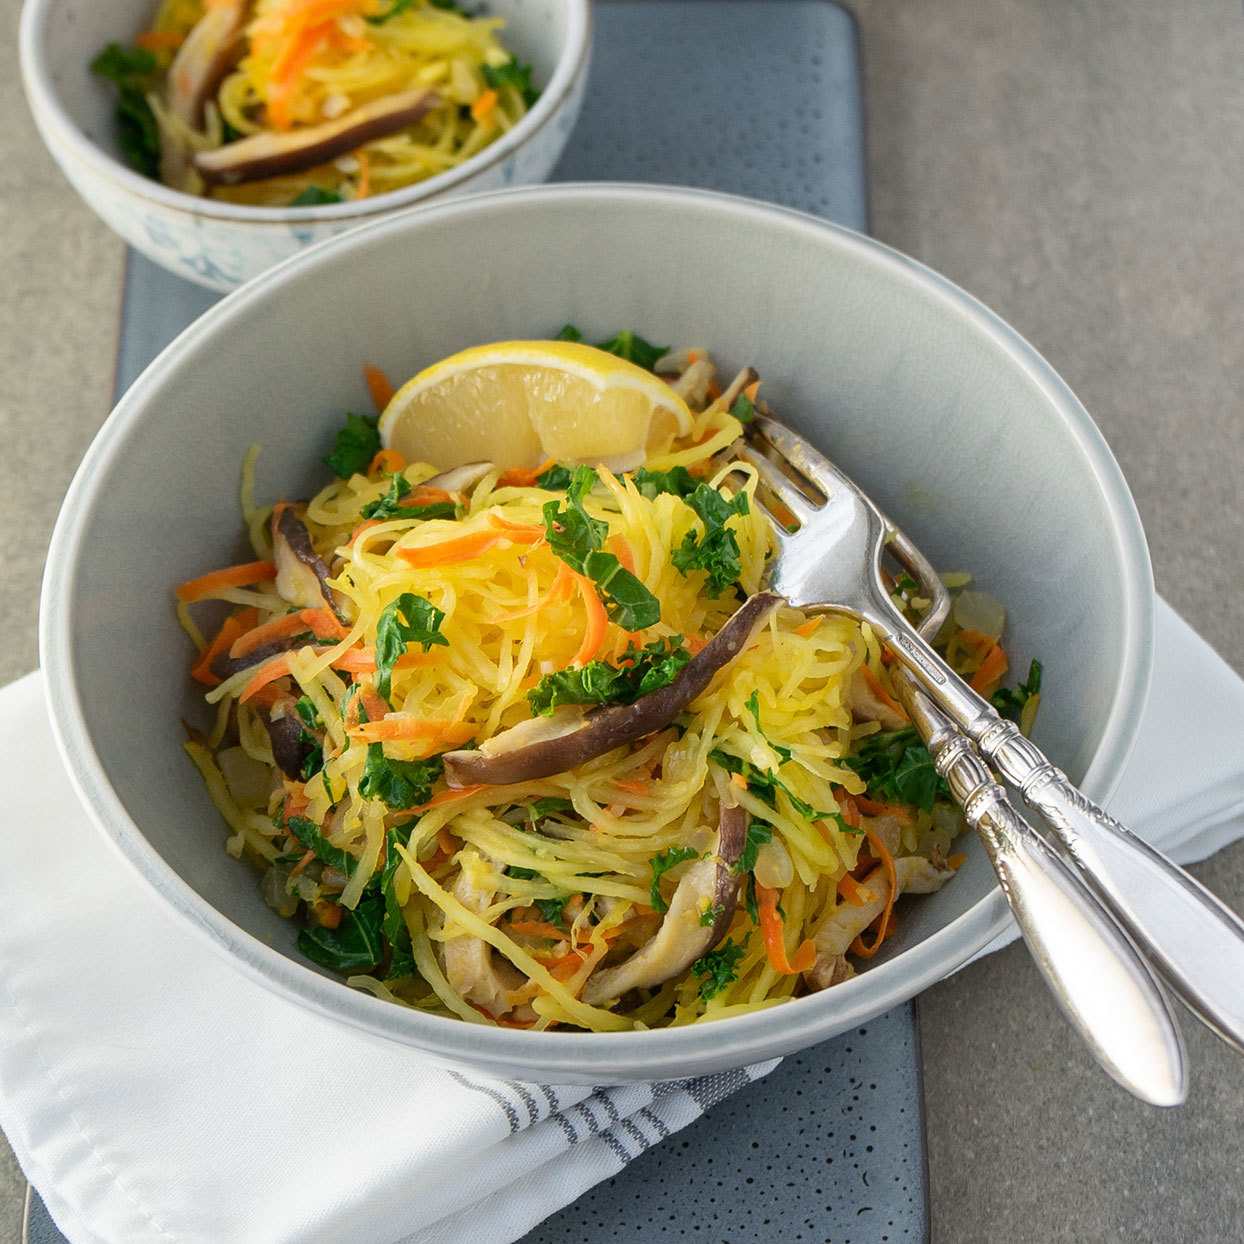 <p>Umami-rich shiitake mushrooms take the place of meat, and spaghetti squash strands stand in for the traditional rice noodles, in this riff on the classic Filipino noodle dish pancit bihon. Serve alongside your favorite vegan main or add some cubed tofu to make it a meal.</p>
                          